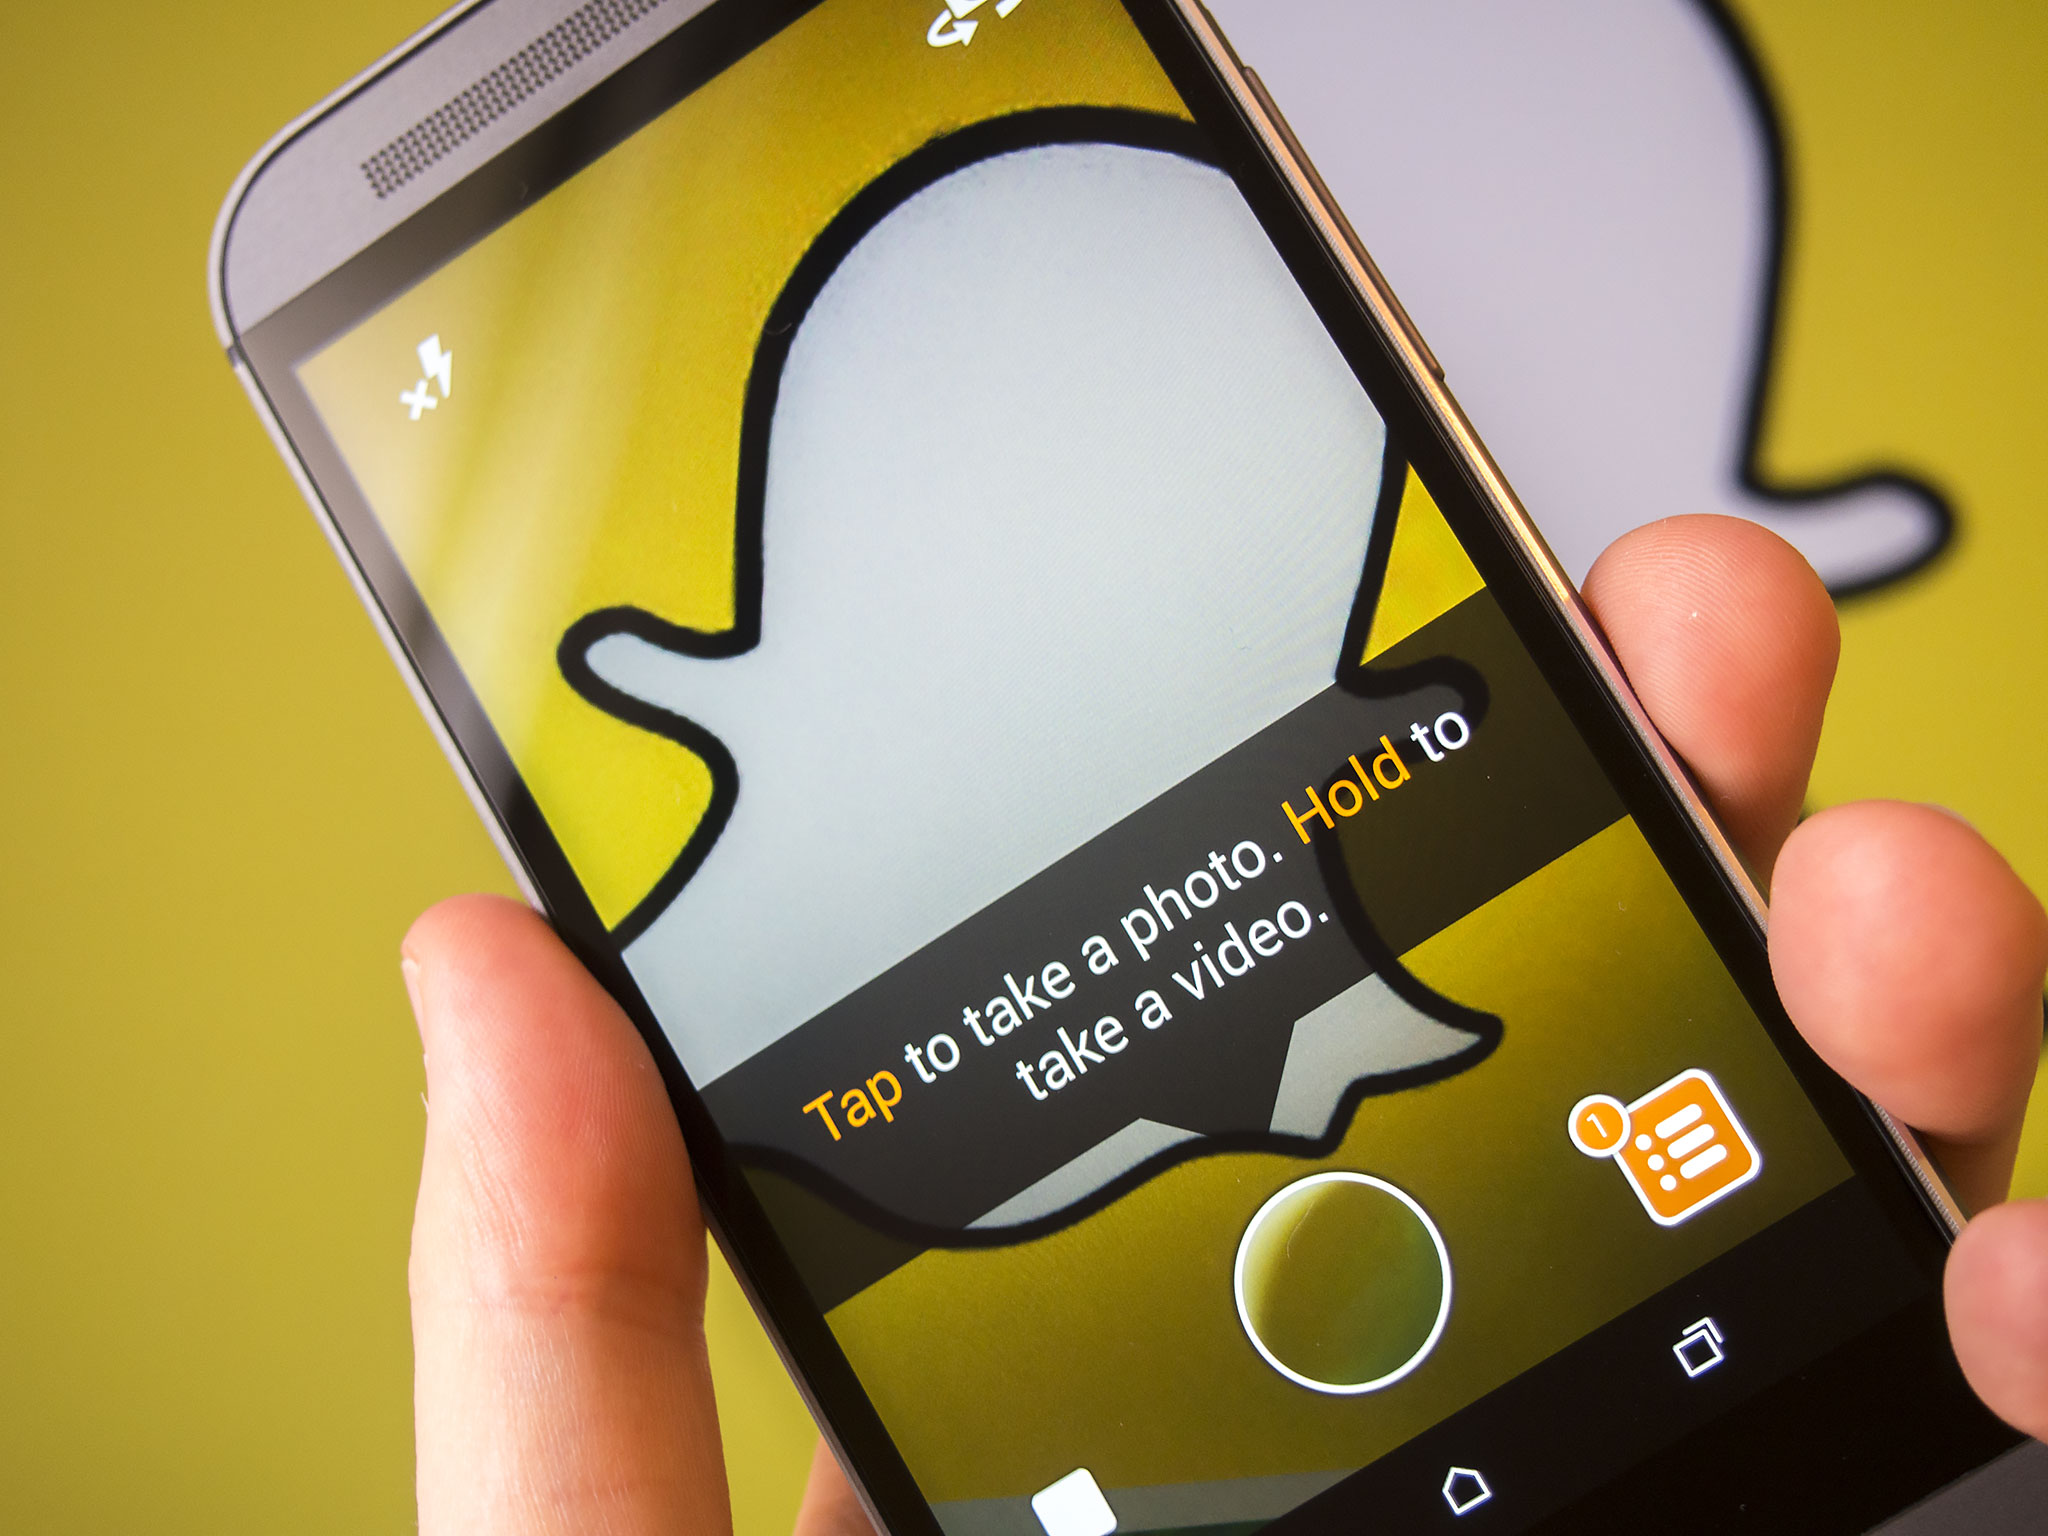 can now send money to your friends through Snapchat Android Central